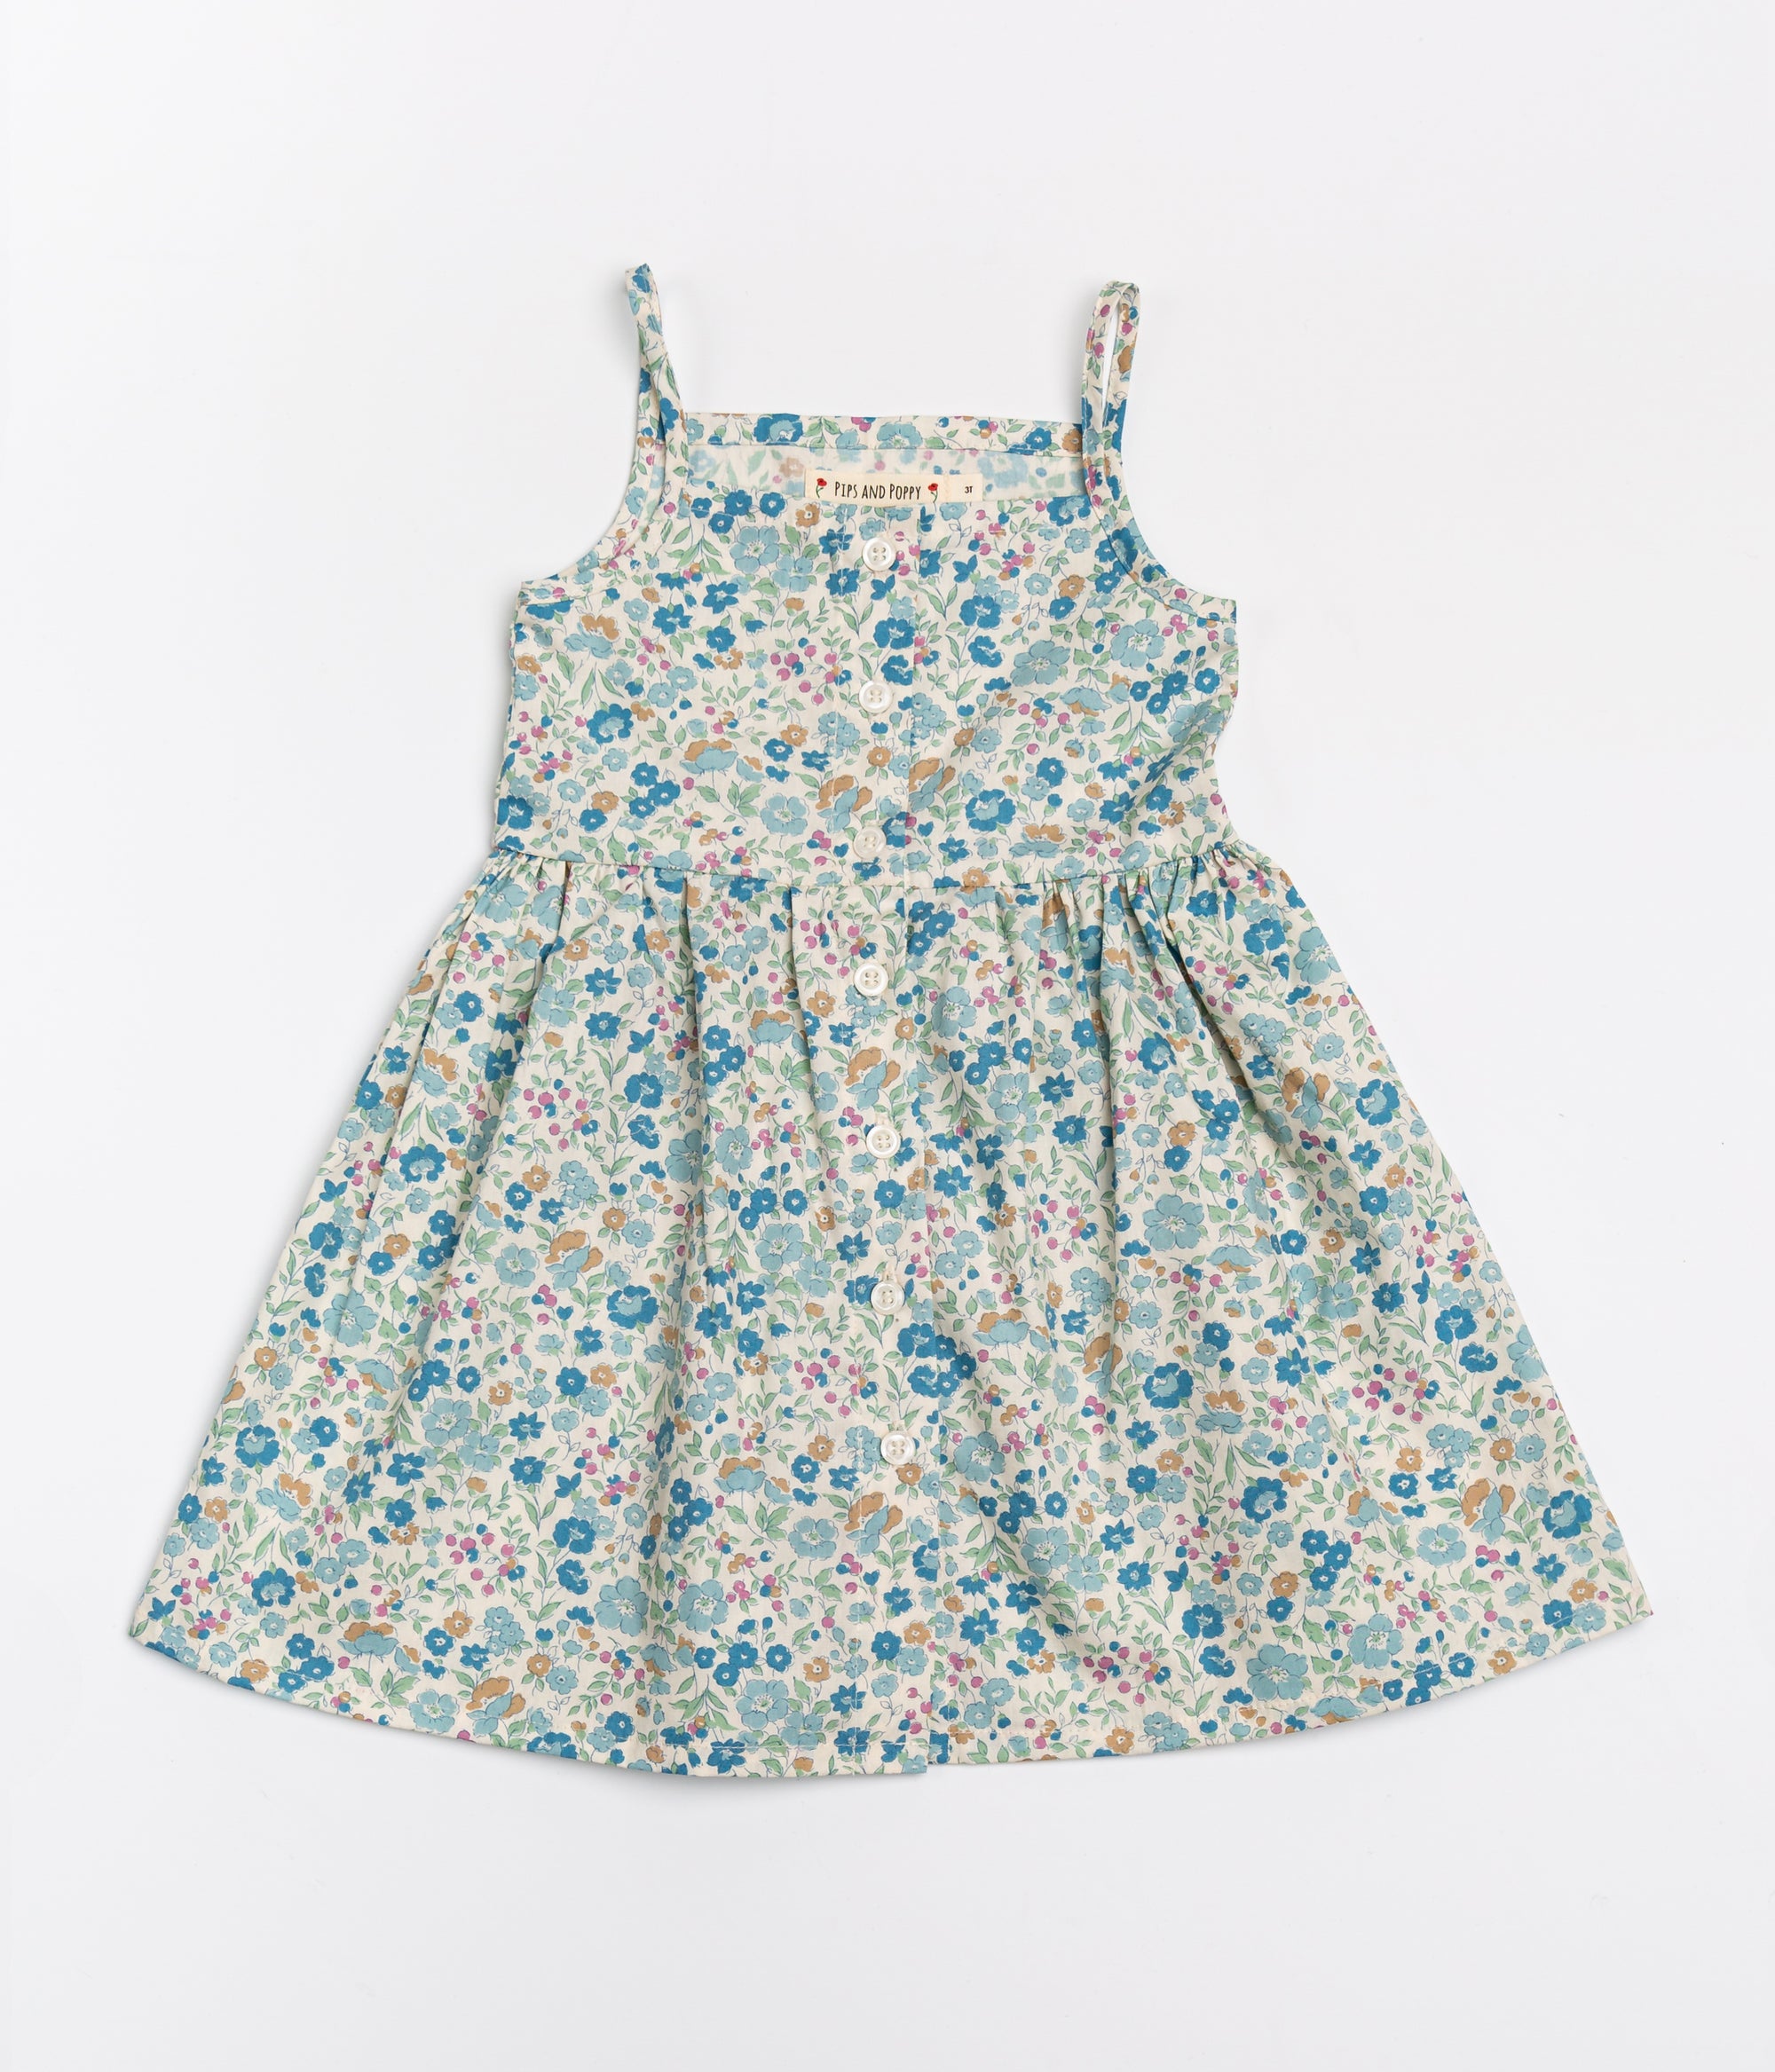 The Heather Dress in Blueberry Floral